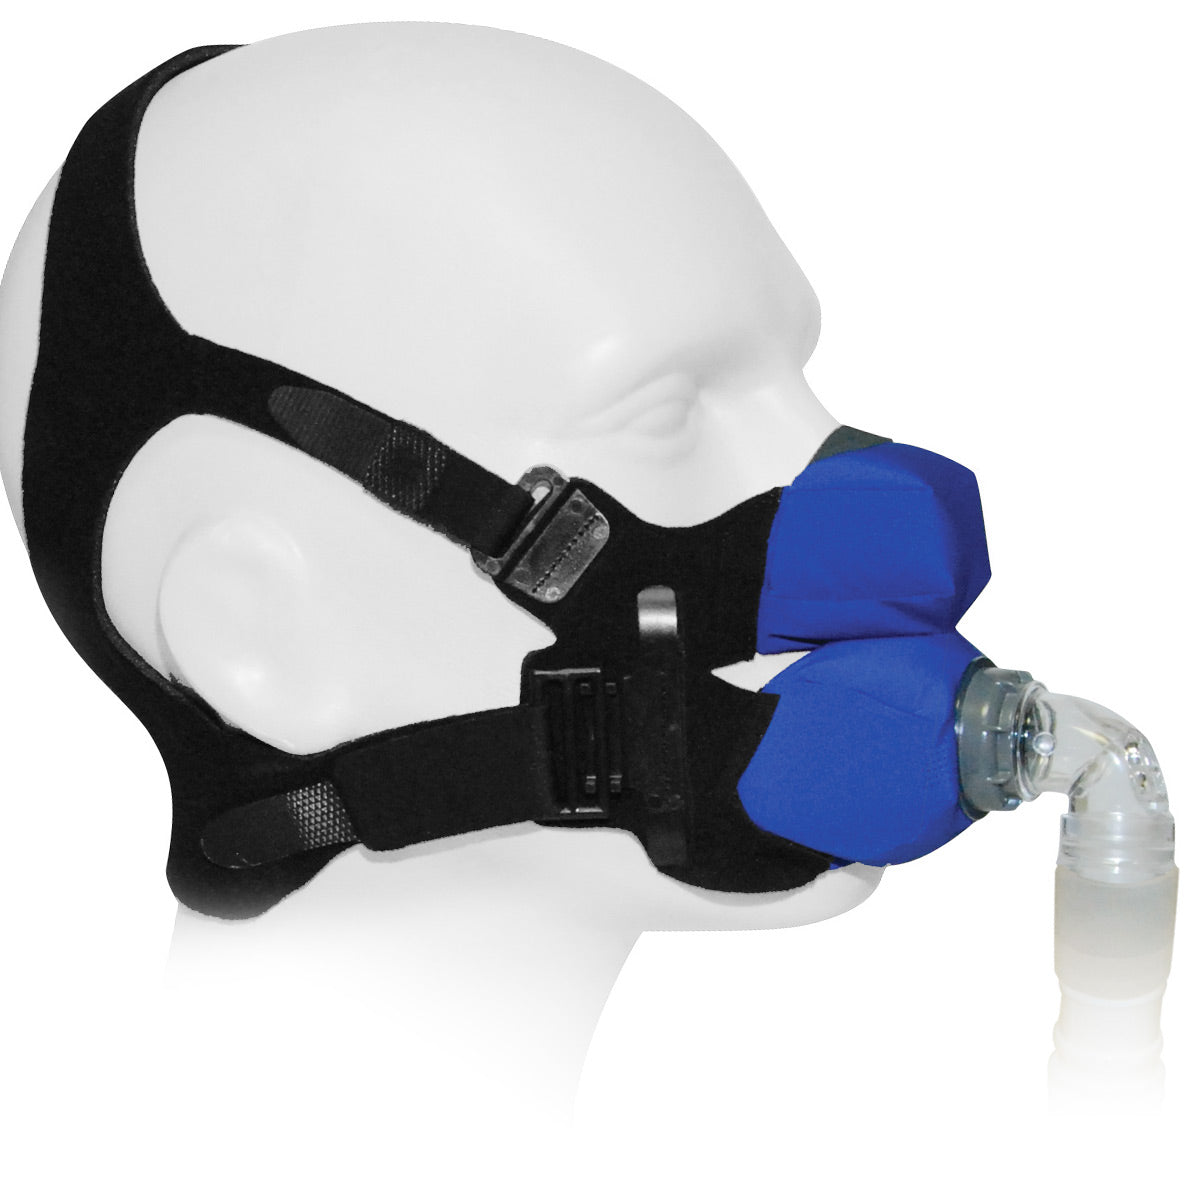 SleepWeaver Anew Soft Cloth Full Face CPAP/BiPAP Mask with Headgear